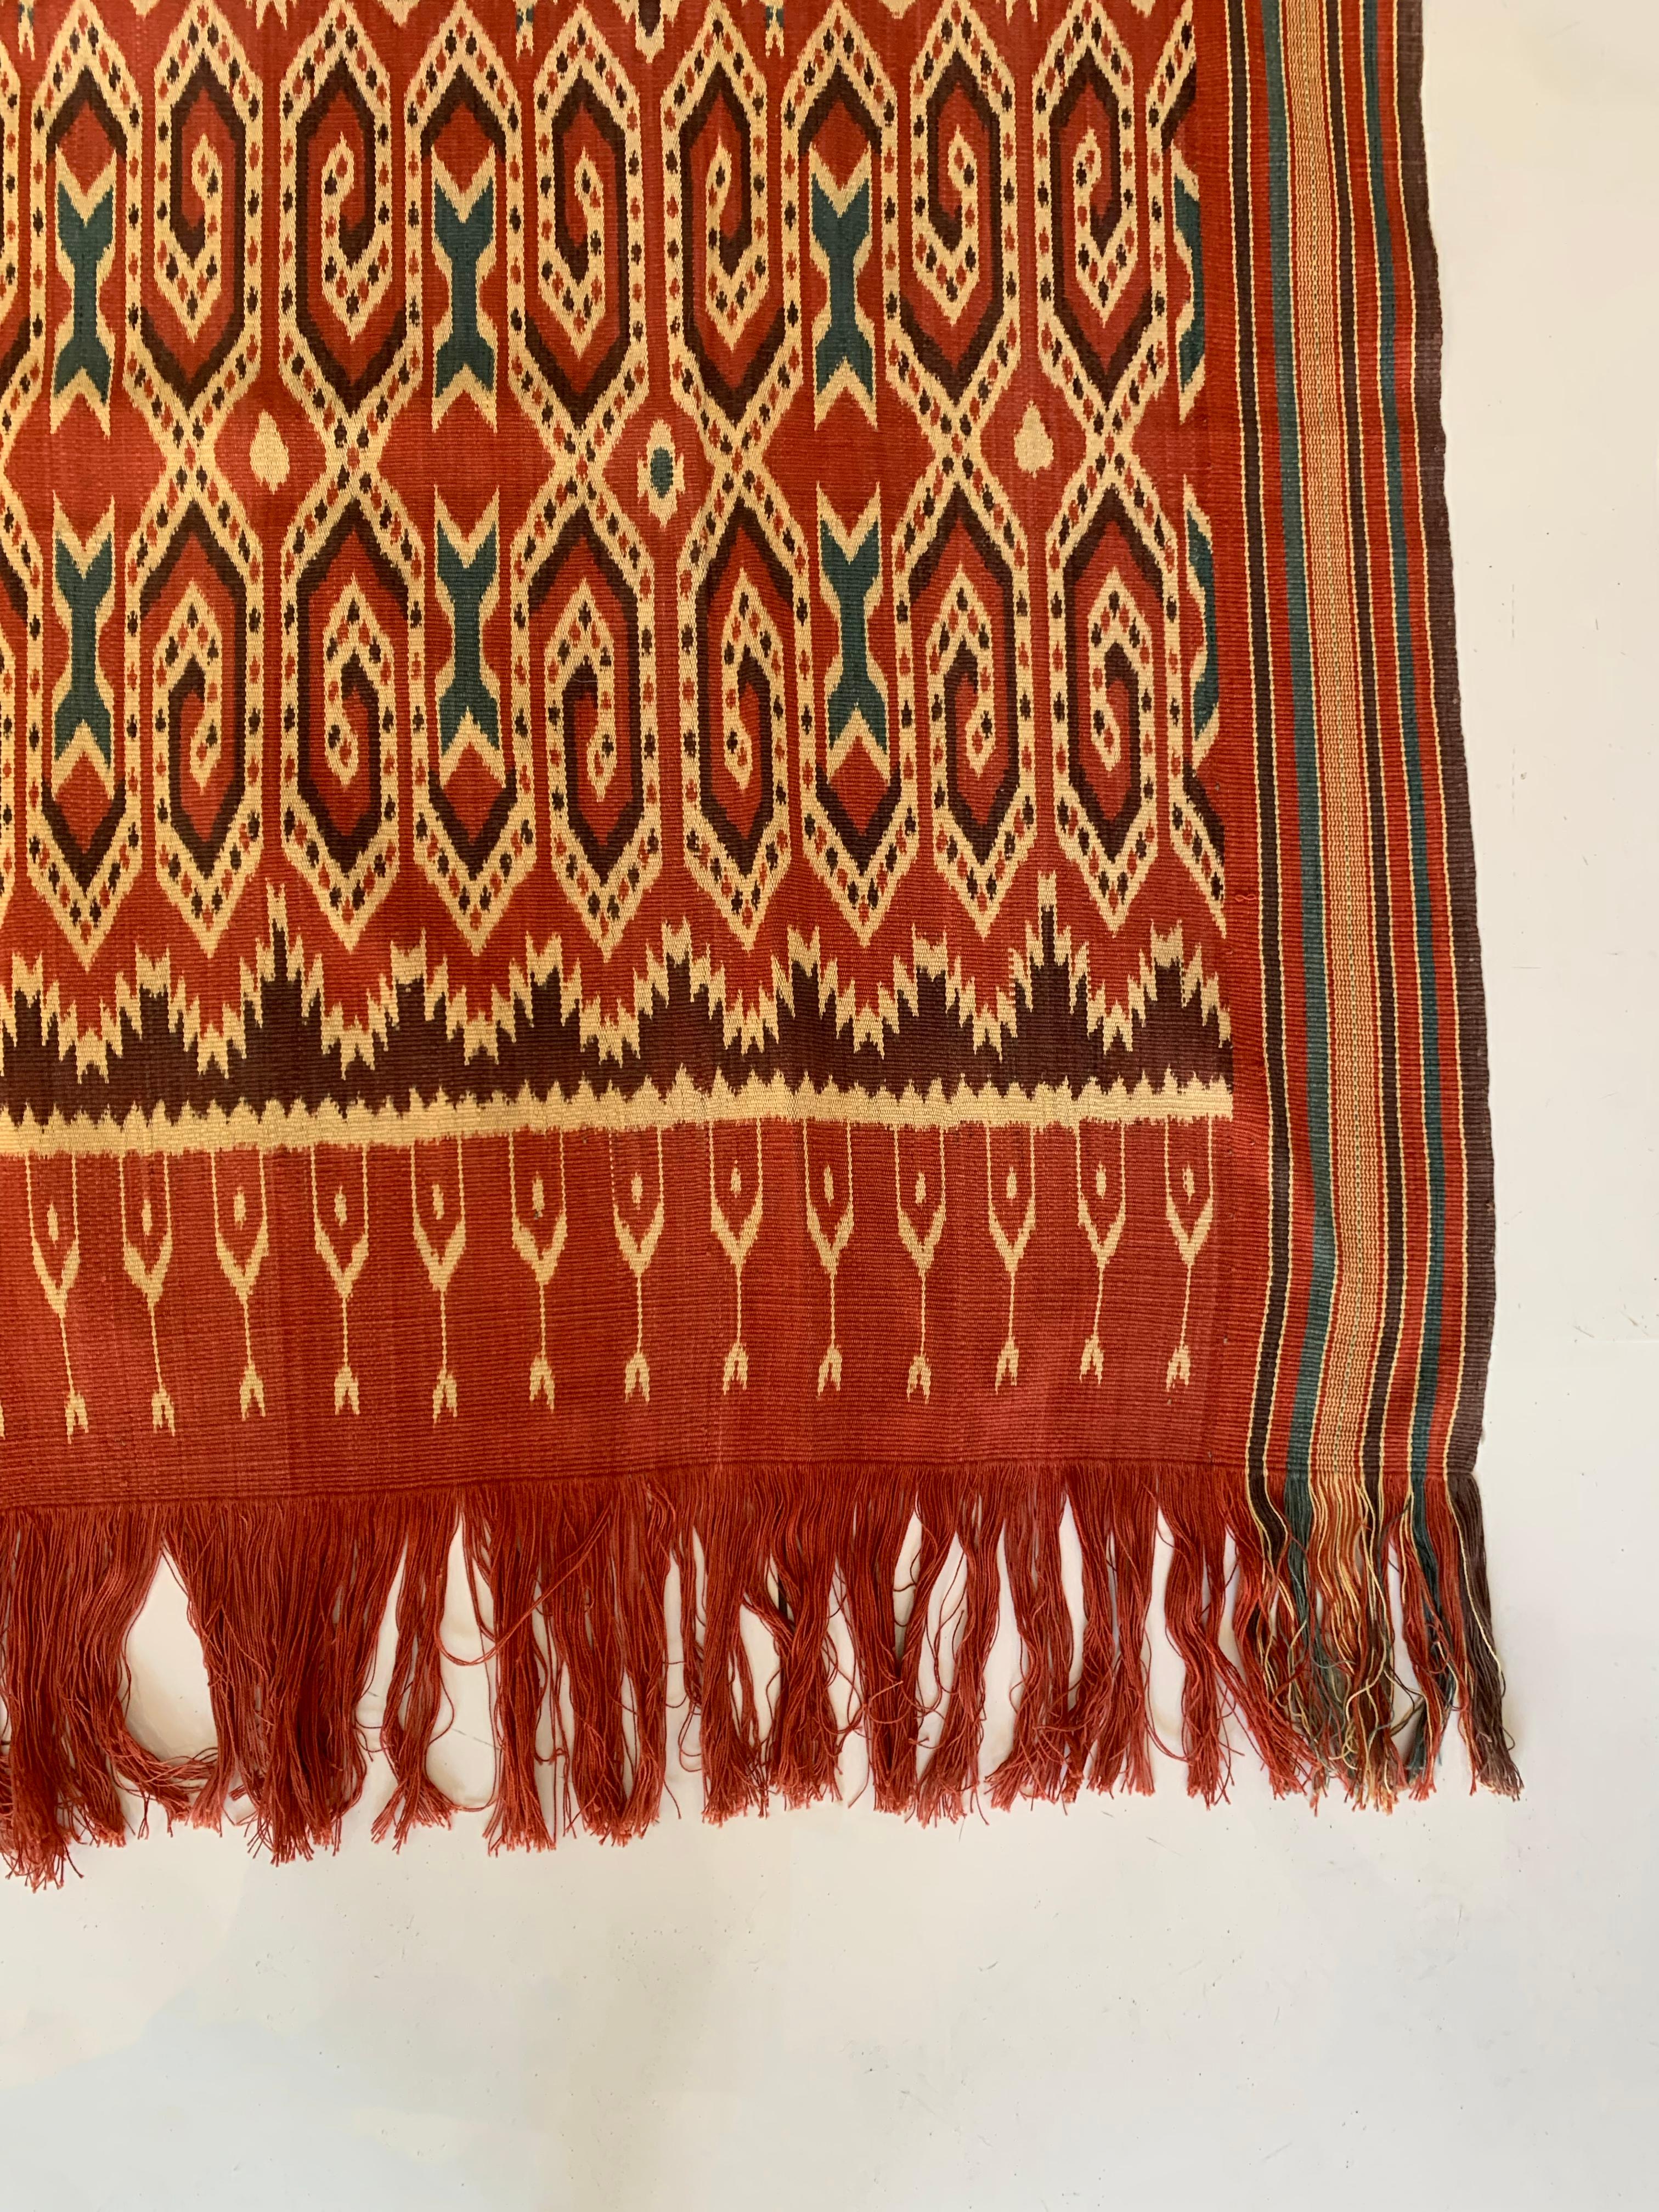 Hand-Woven Ikat Textile from Toraja Tribe of  Sulawesi with Stunning Tribal Motifs